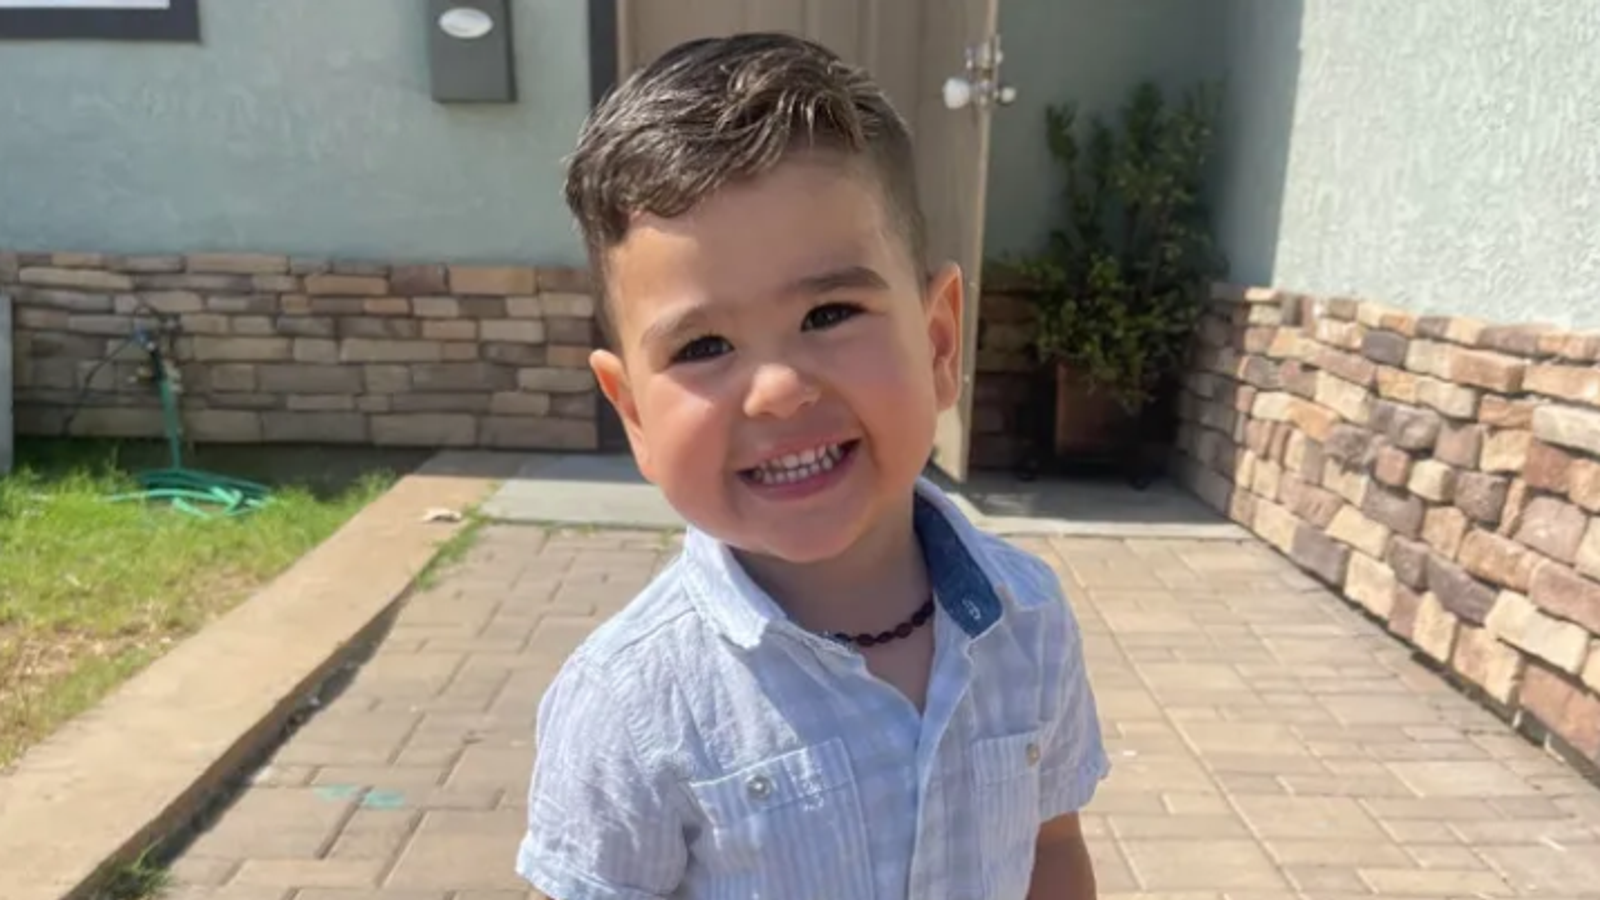 'A beautiful soul has been taken': Boy, 3, killed by car as he headed to his own birthday party